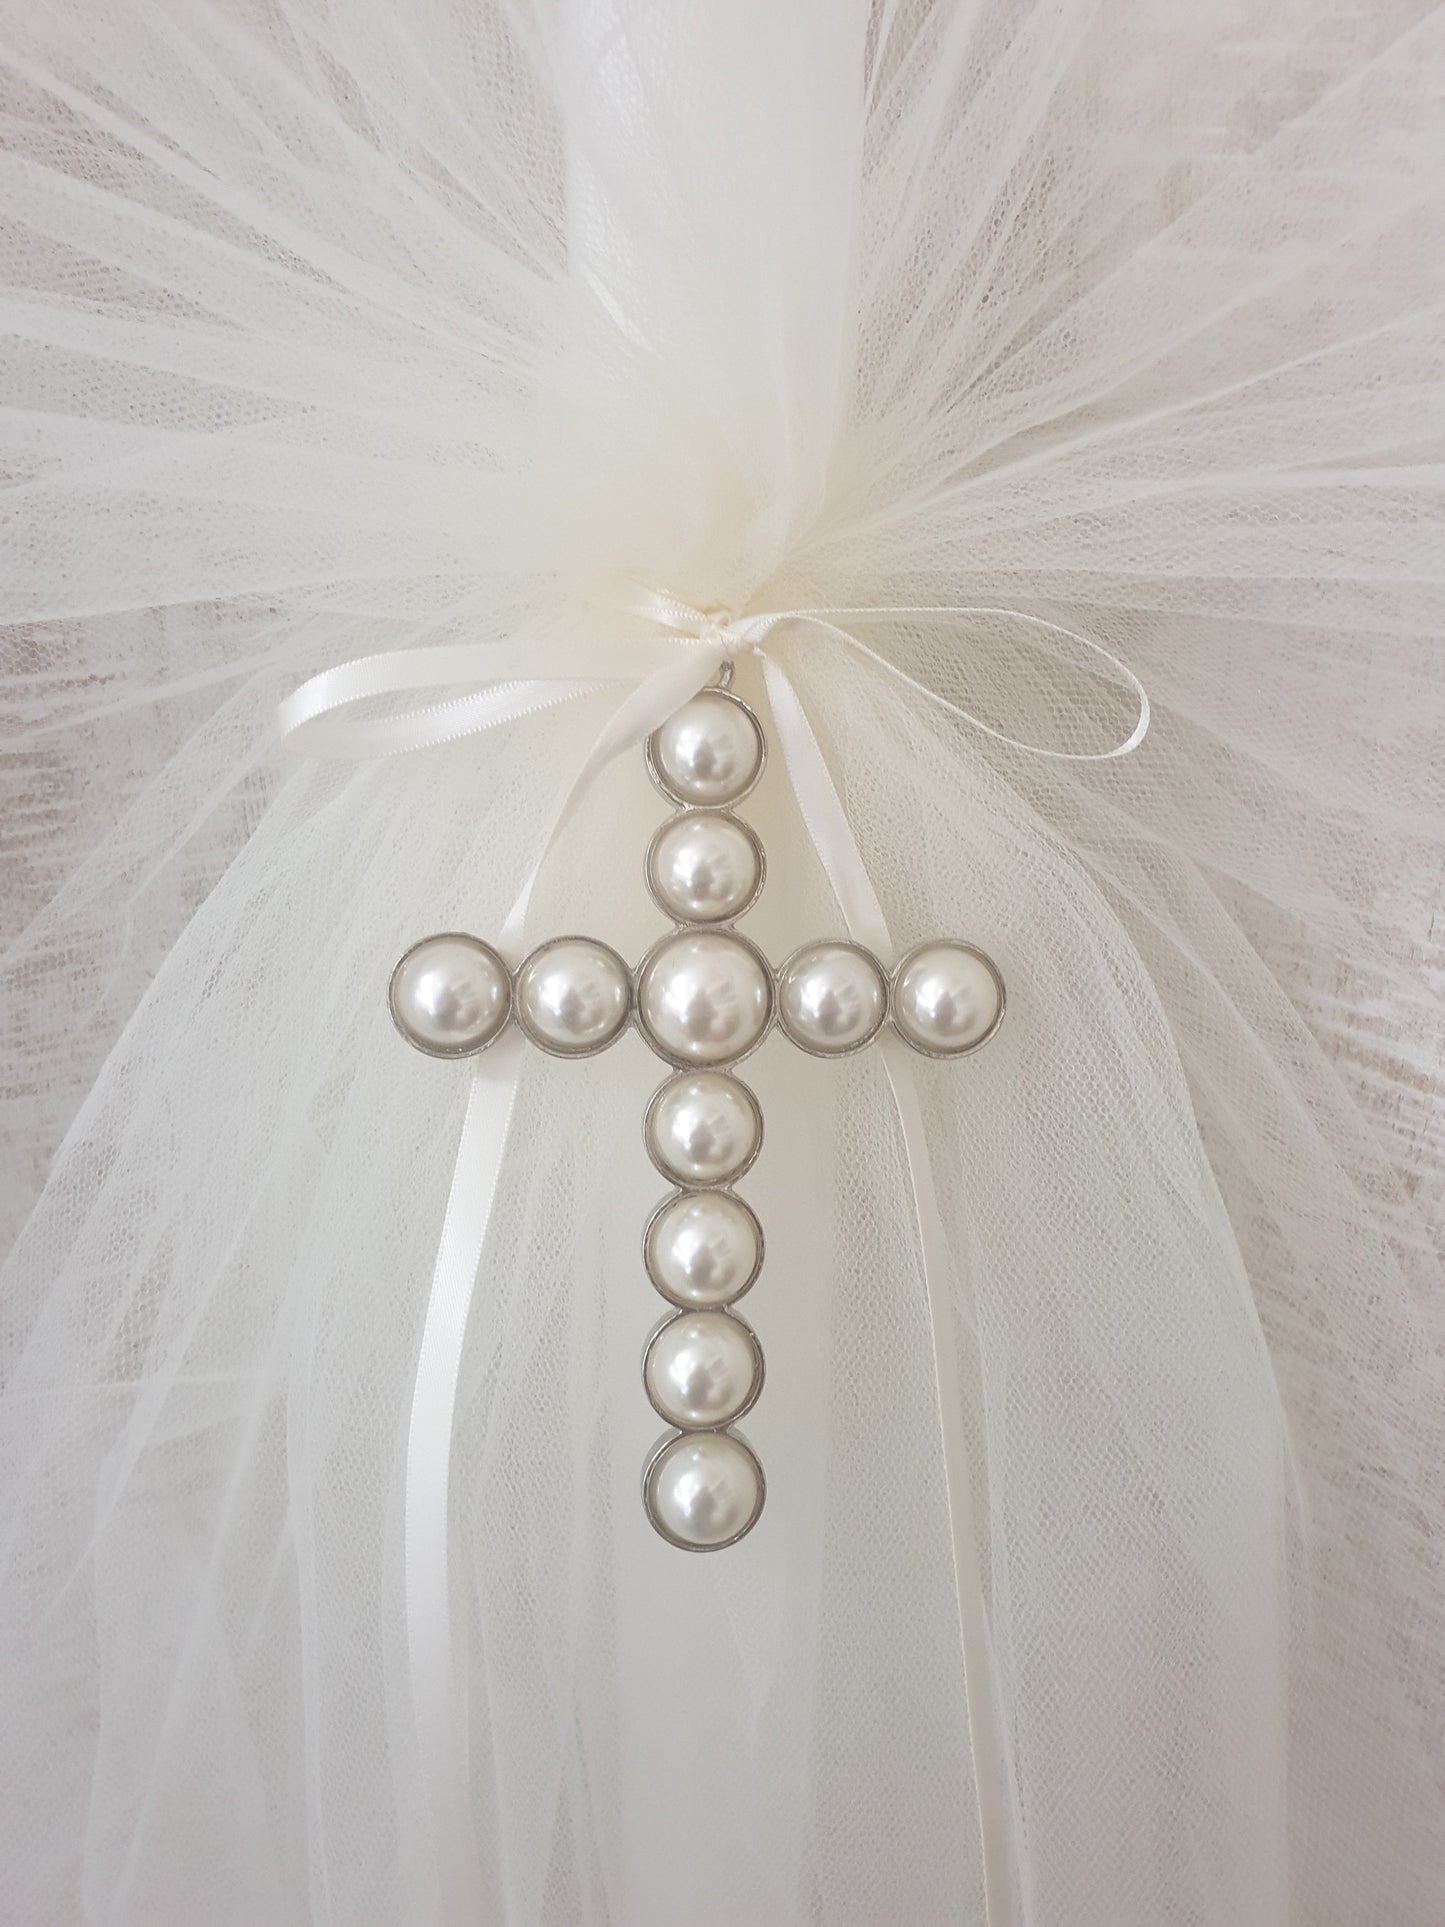 Orthodox Christening Candle - Large Pearl Cross | Pandora Designs Melbourne